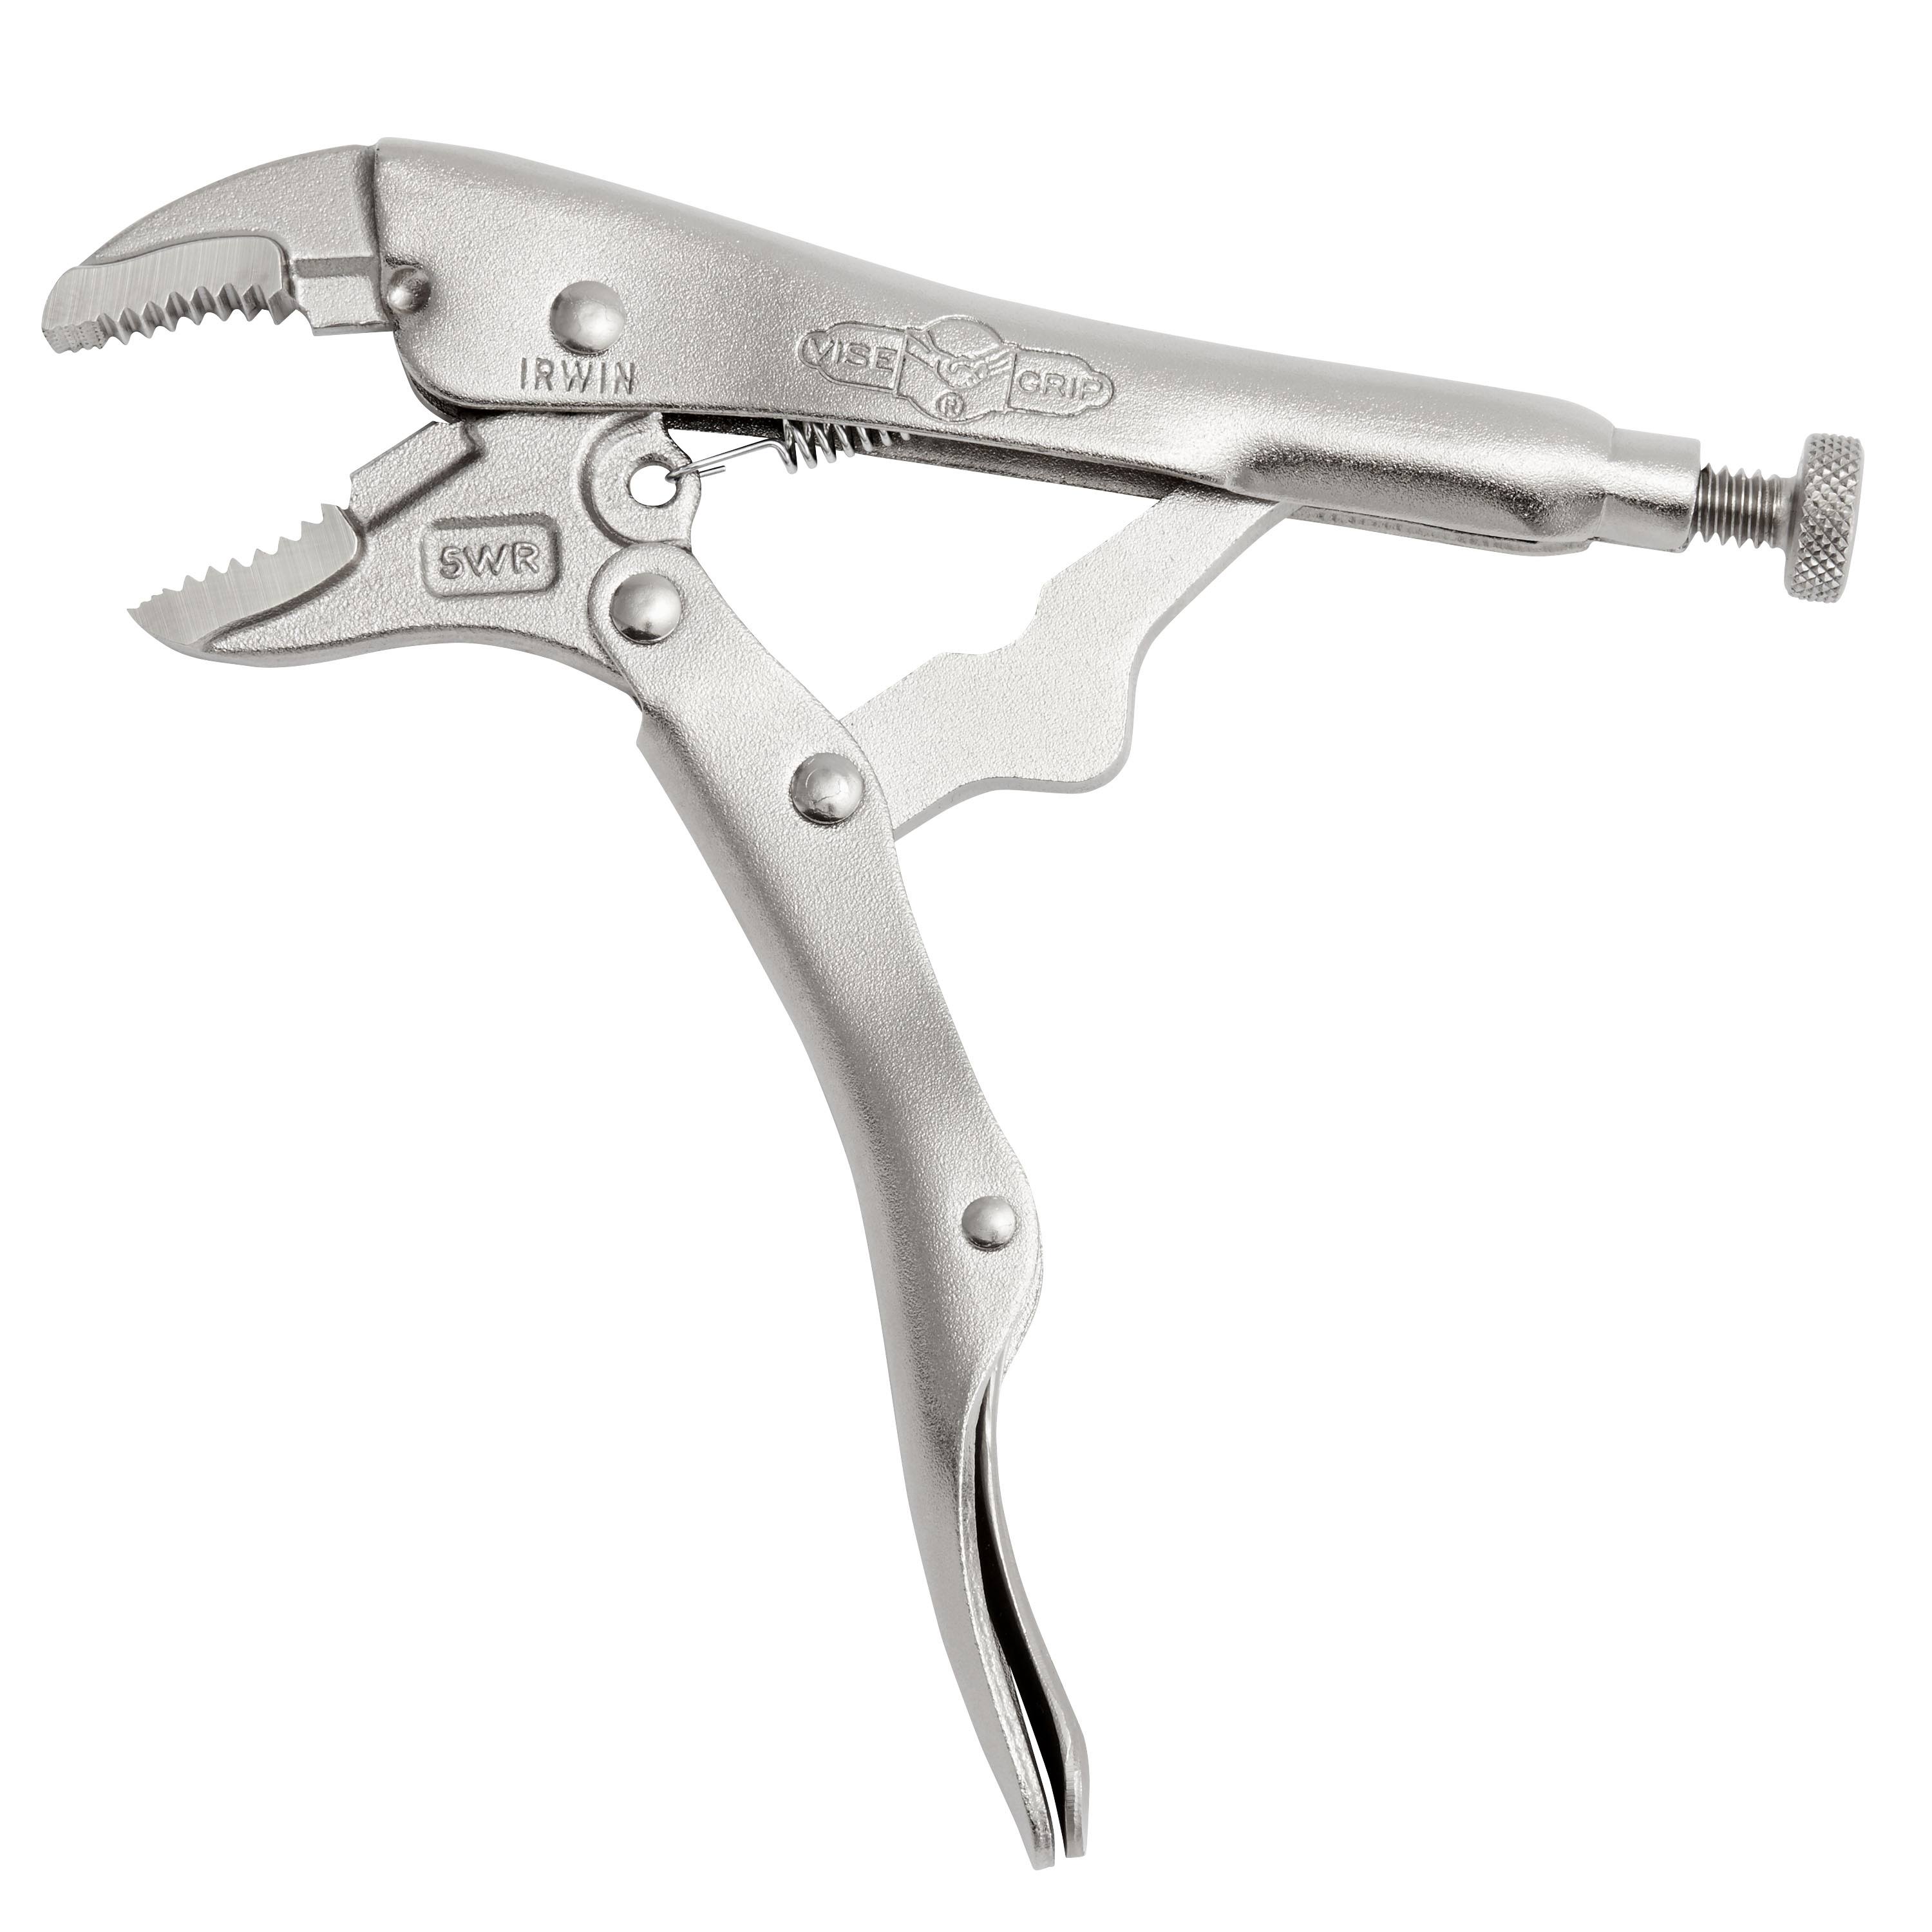 Irwin Vise-Grip Curved Jaw Locking Pliers with Wire Cutter